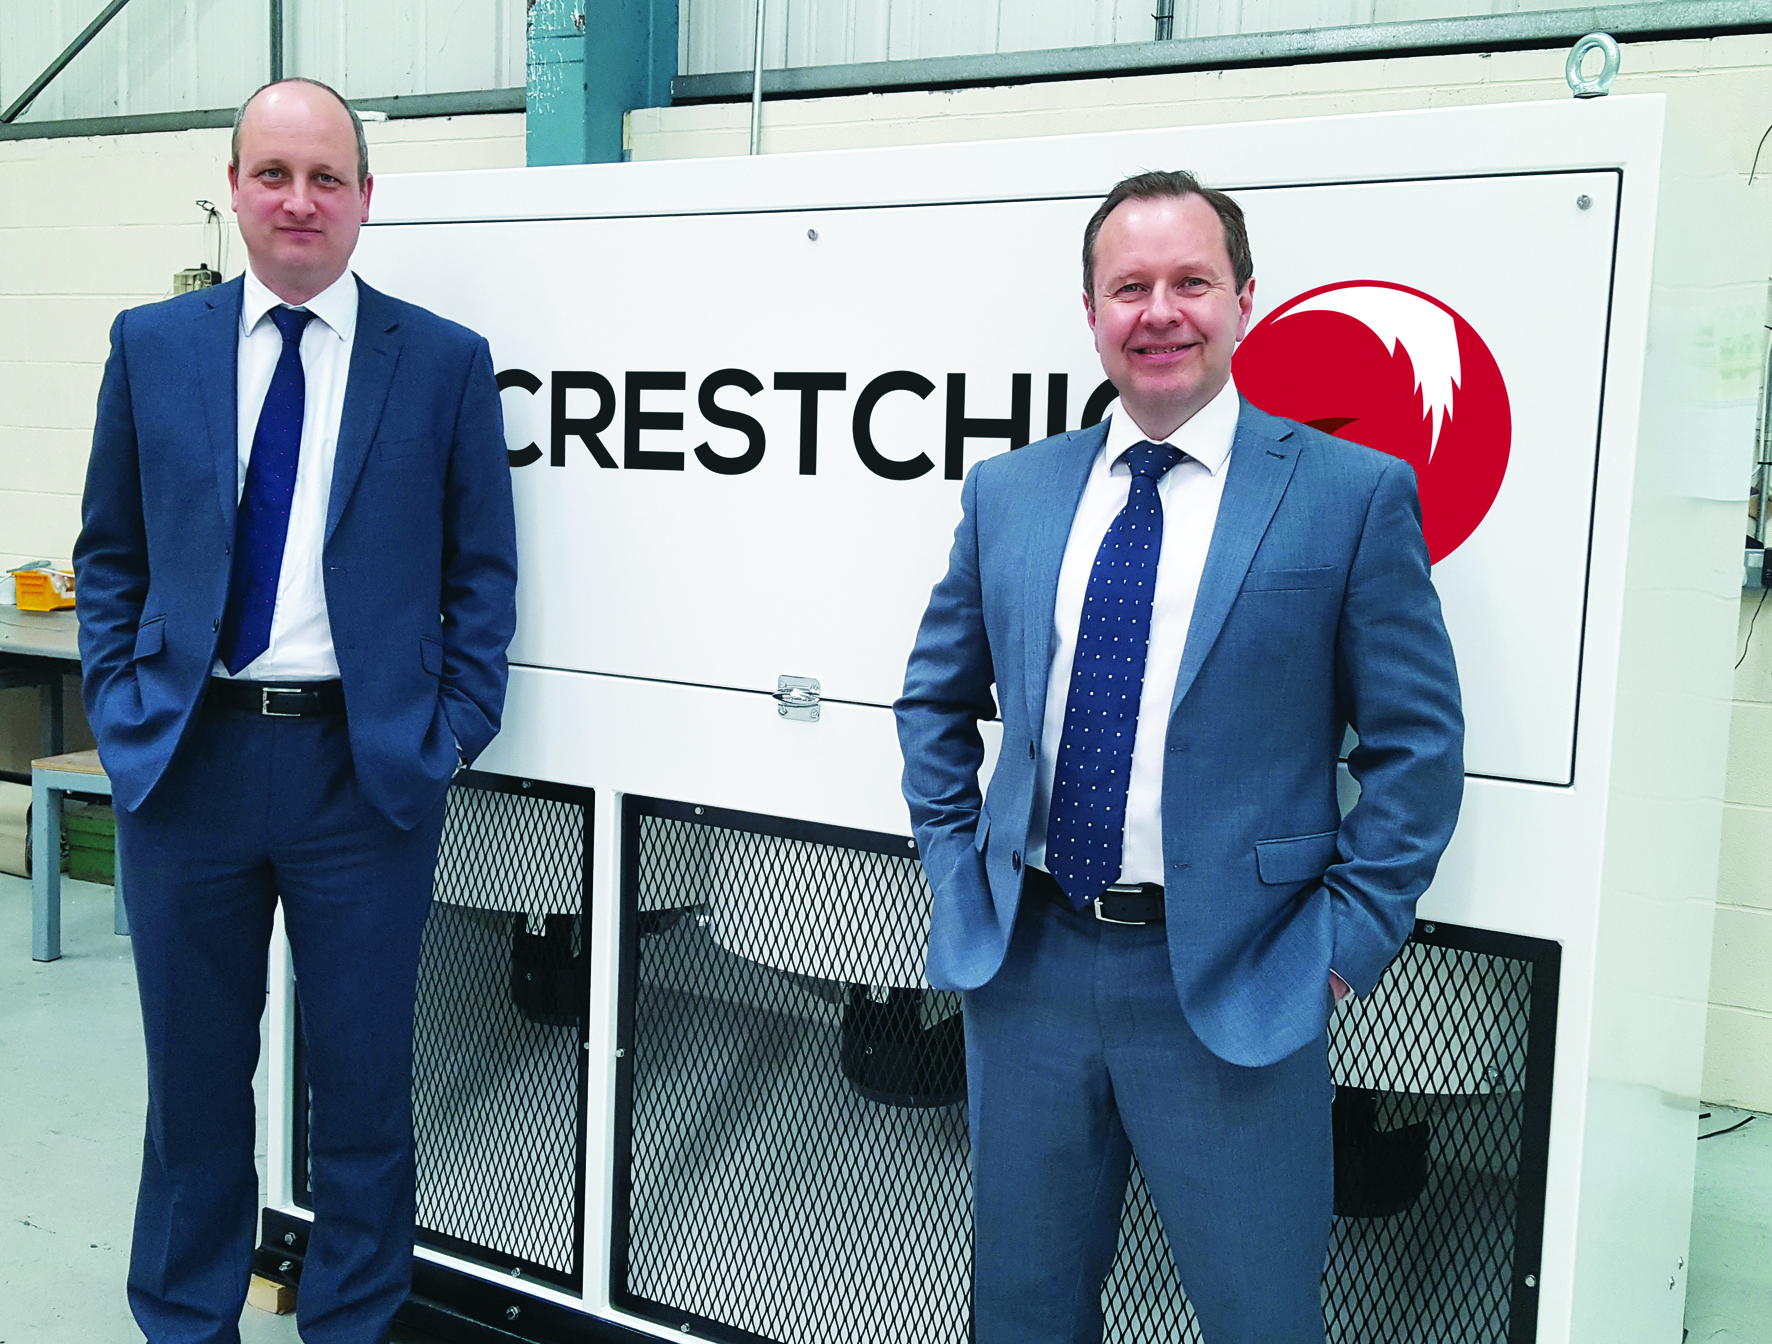 Crestchic announces the appointment of Chris Caldwell as managing director